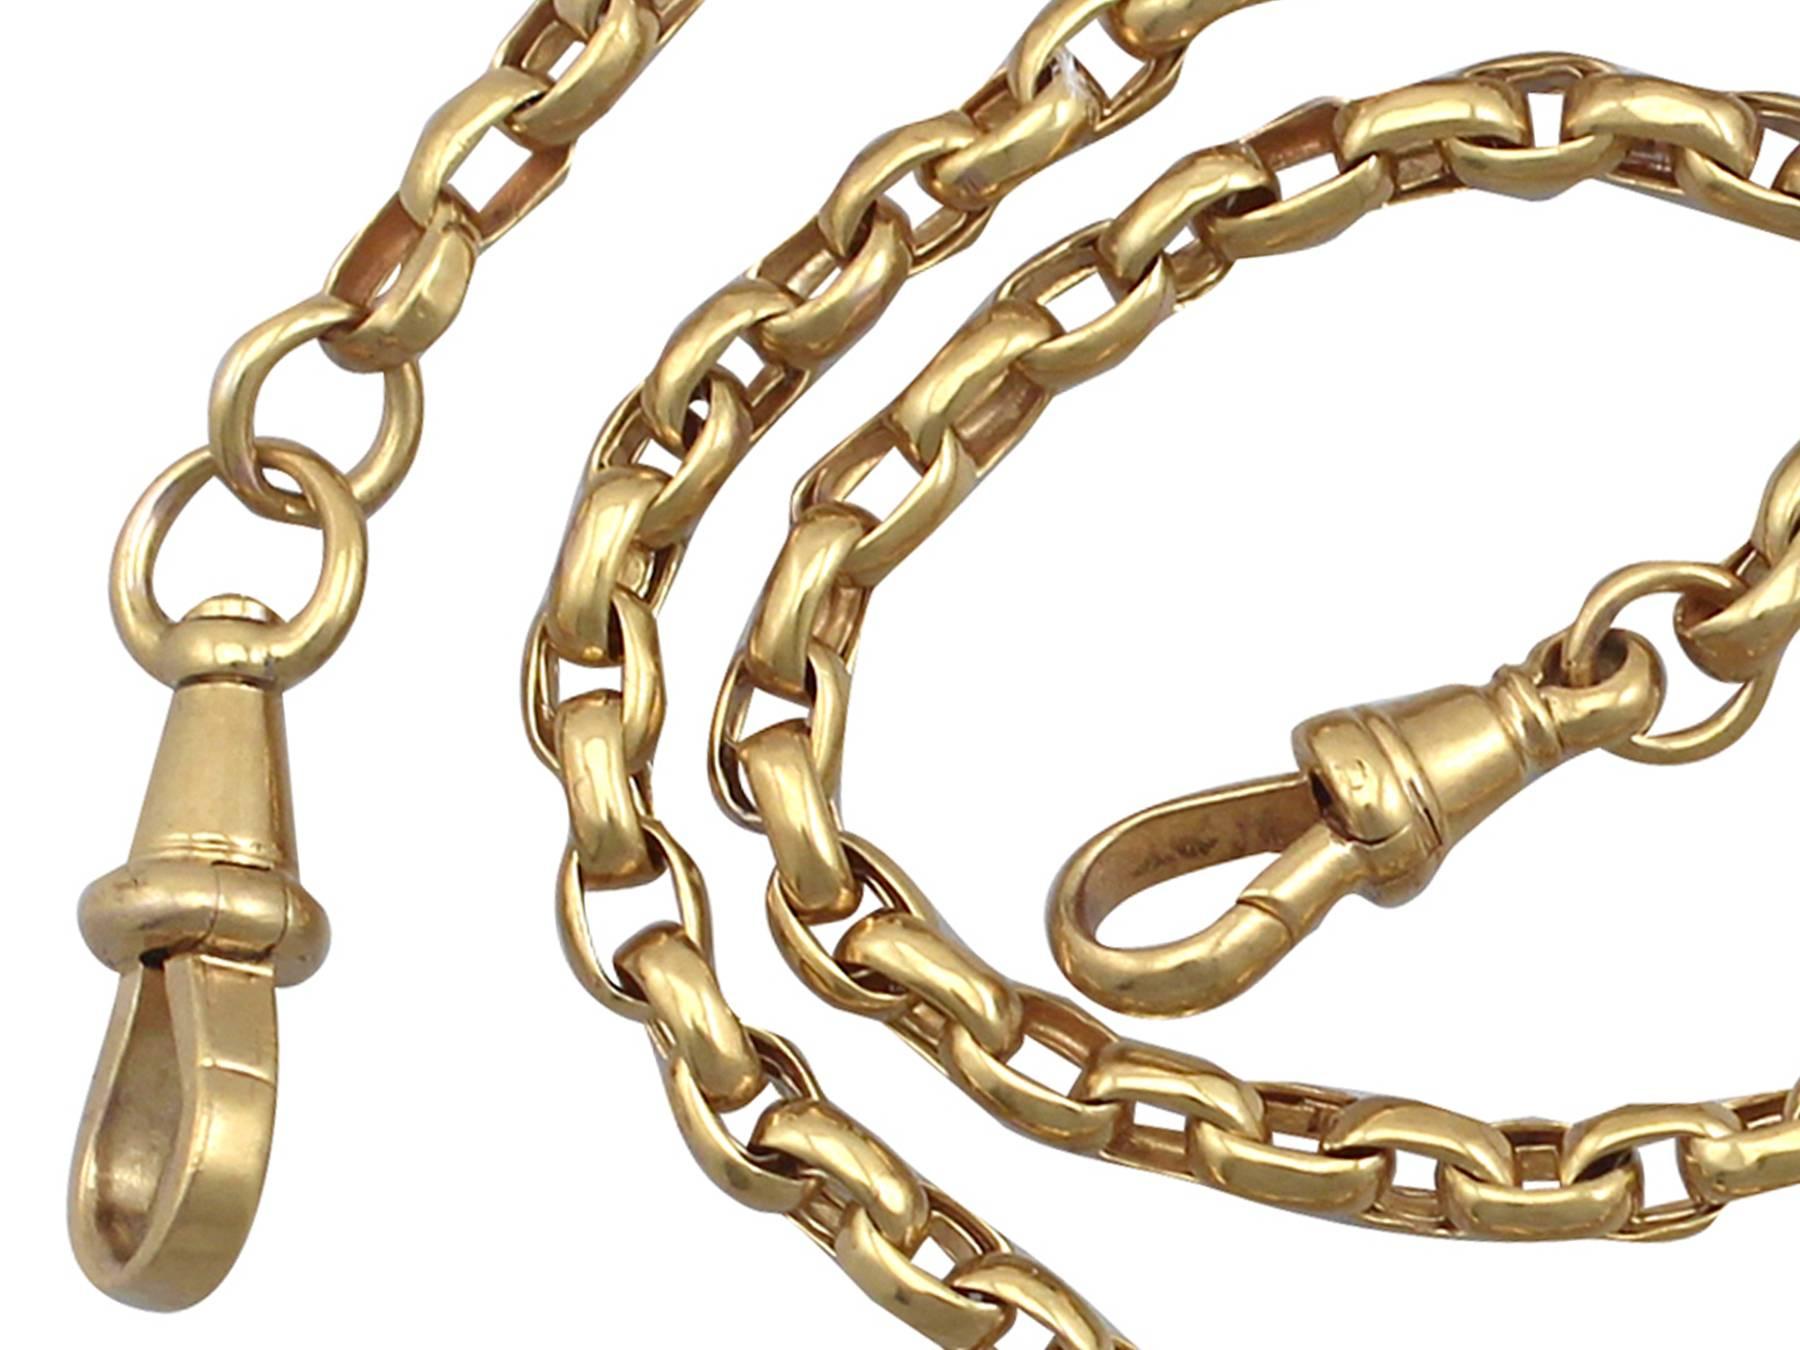 A fine and impressive antique 1900's 9 karat yellow gold belcher style watch chain / bracelet; part of our diverse antique jewelry and estate jewelry collections

This fine and impressive antique chain has been crafted in 9k yellow gold.

The chain